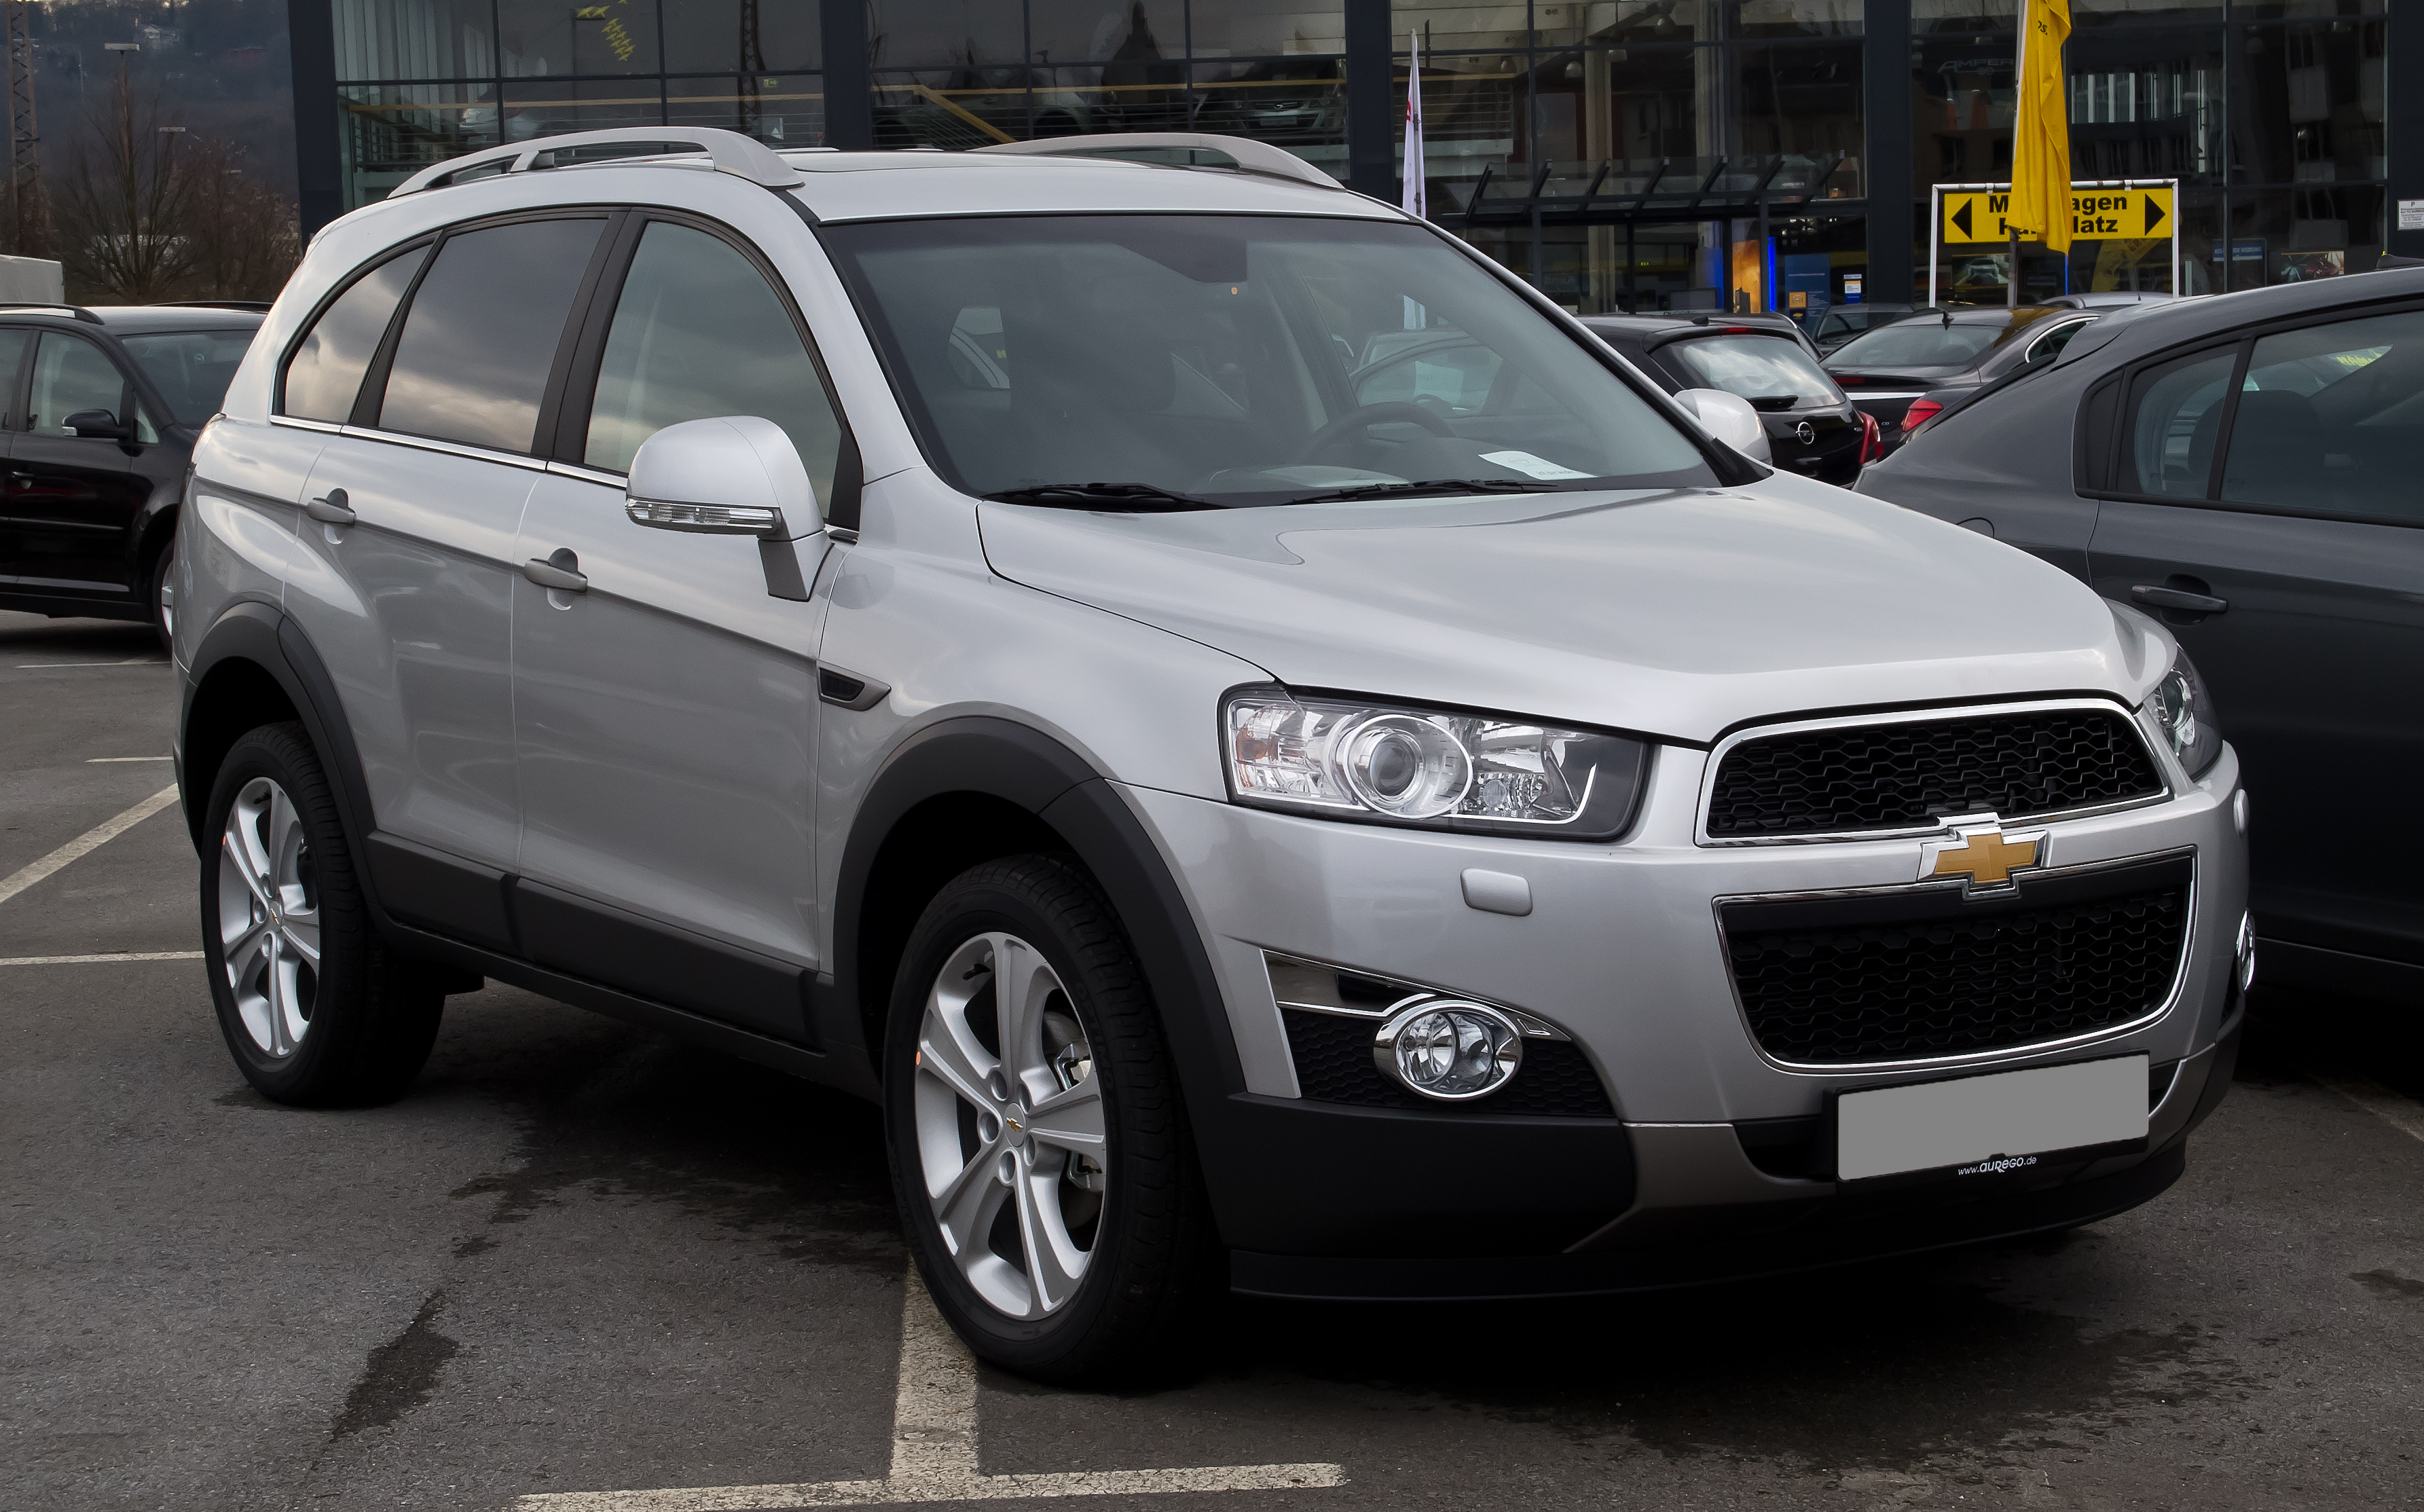 2014 Chevrolet Captiva car on the road wallpapers and 